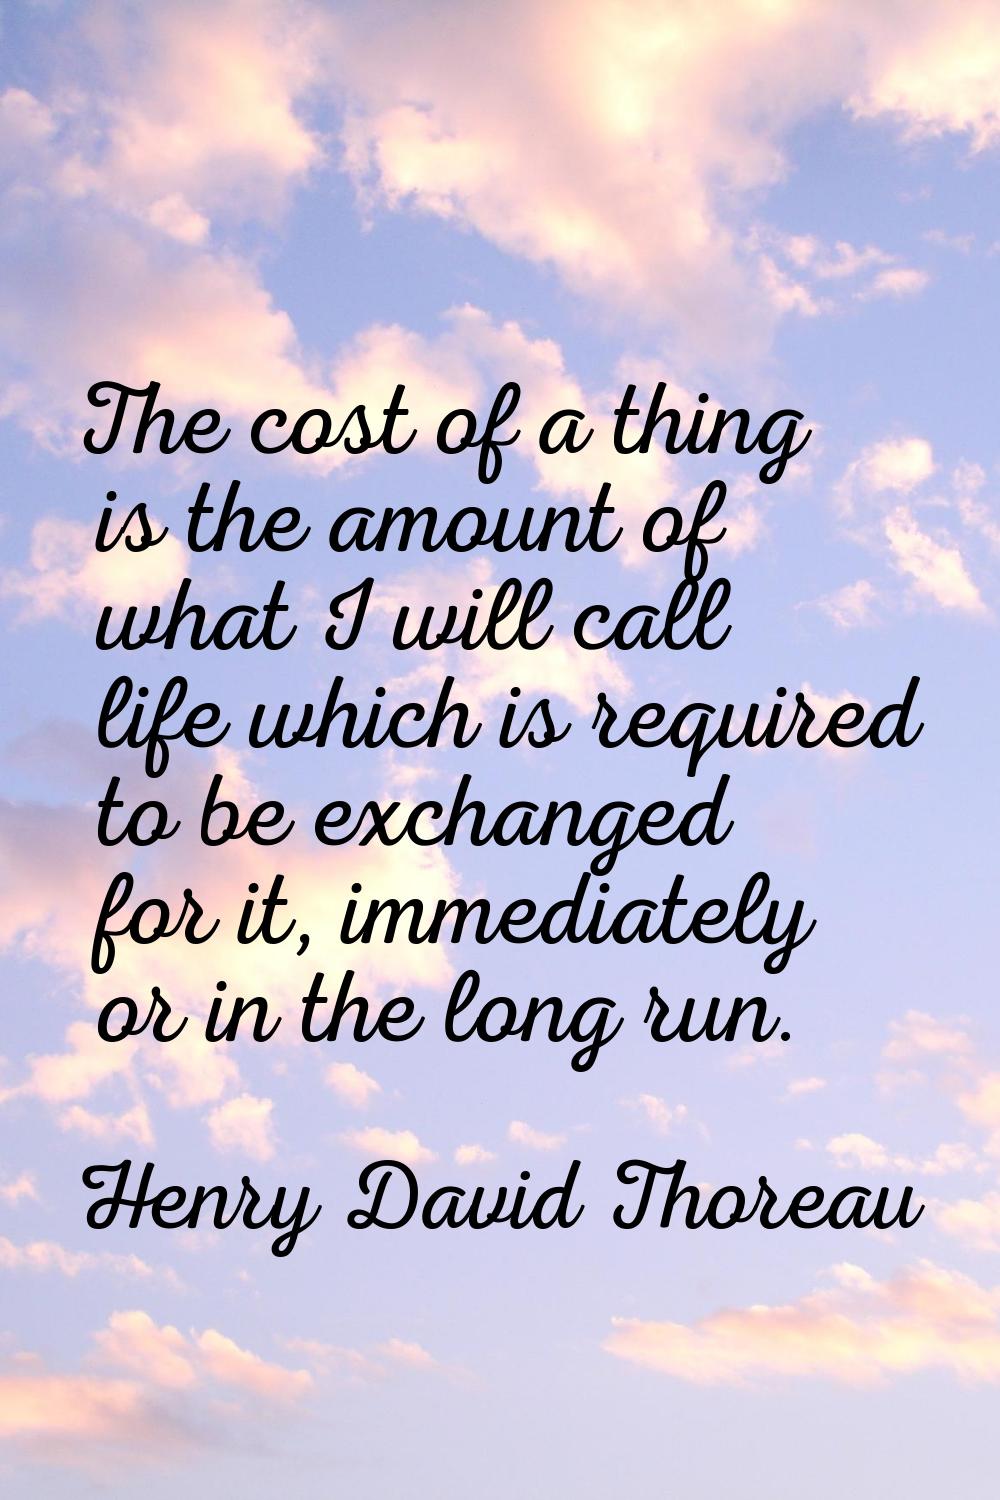 The cost of a thing is the amount of what I will call life which is required to be exchanged for it